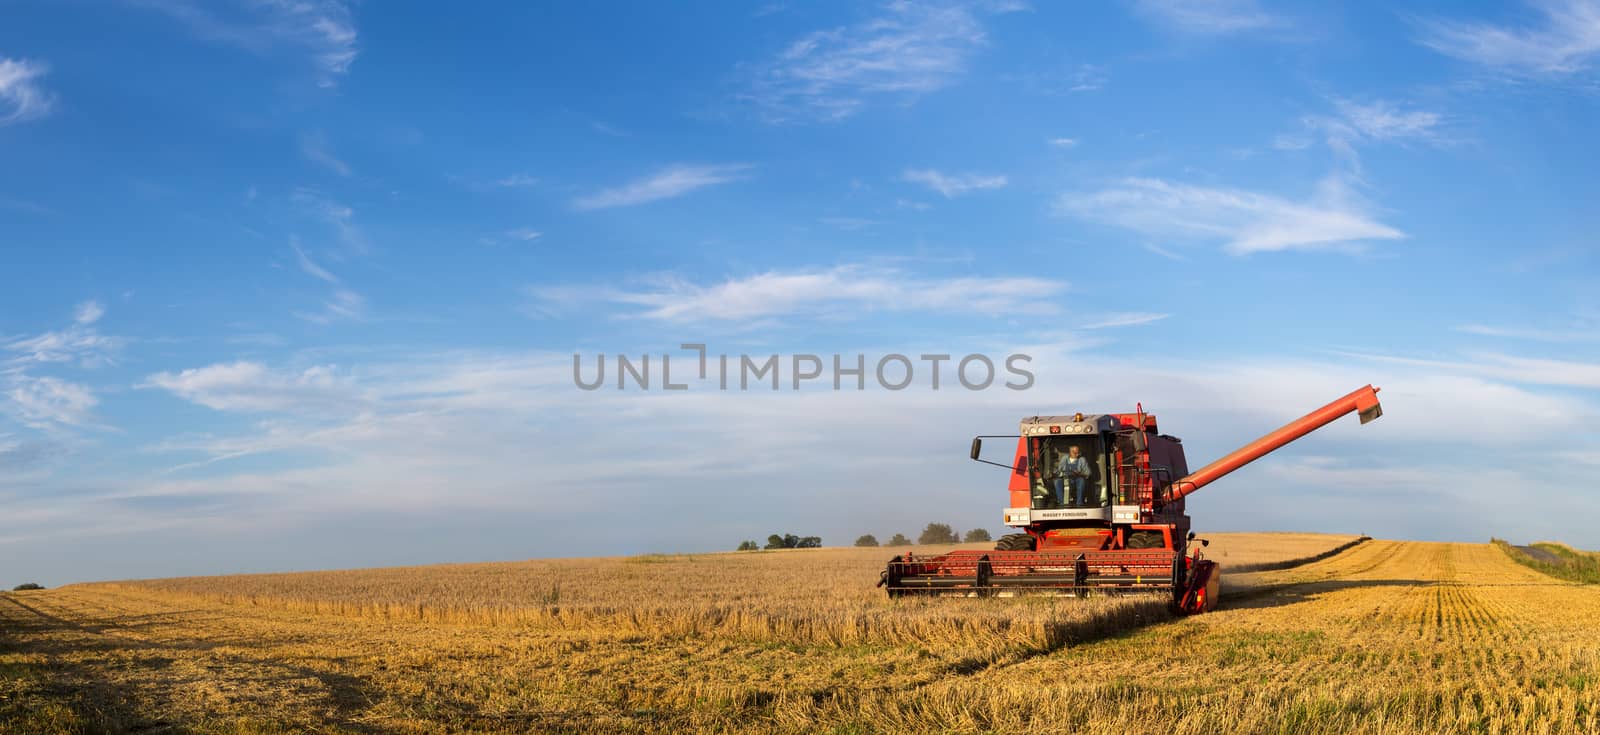 Ramlose, Denmark - August 24, 2016: Panoramic view of a combine harvester at work